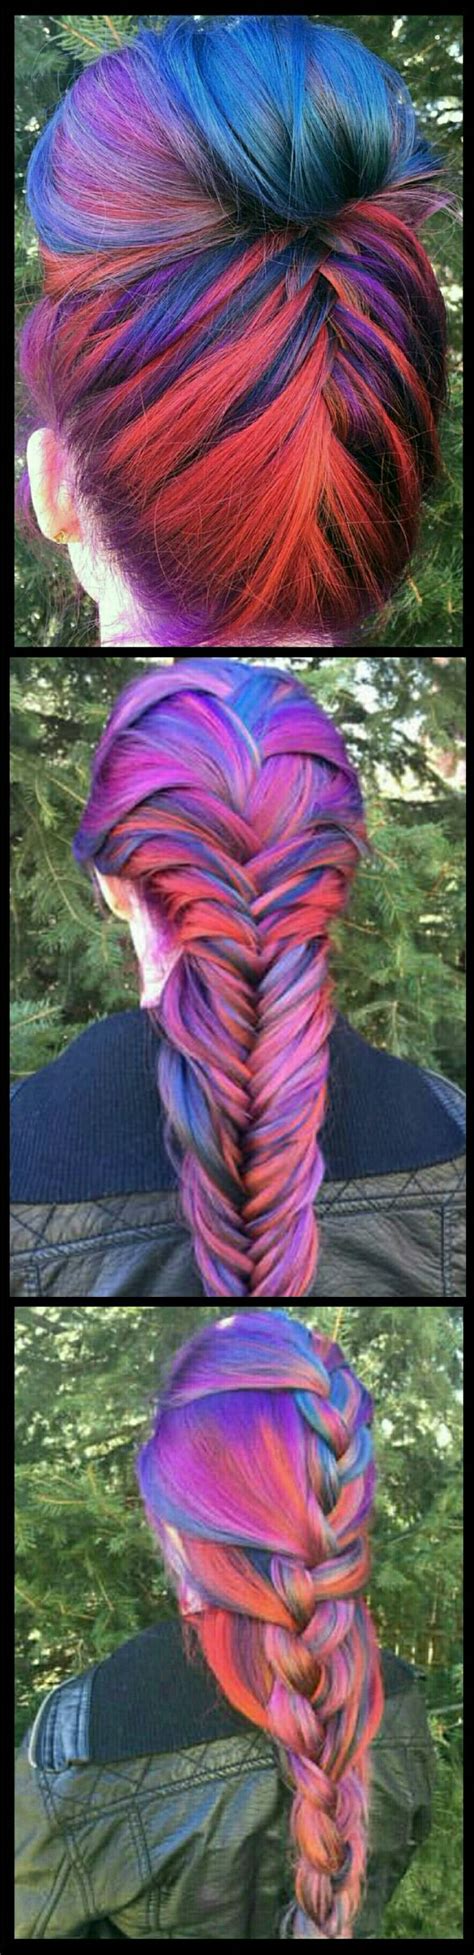 Purple red blue multi braided dyed hair color @color_ahead | Hair color ...